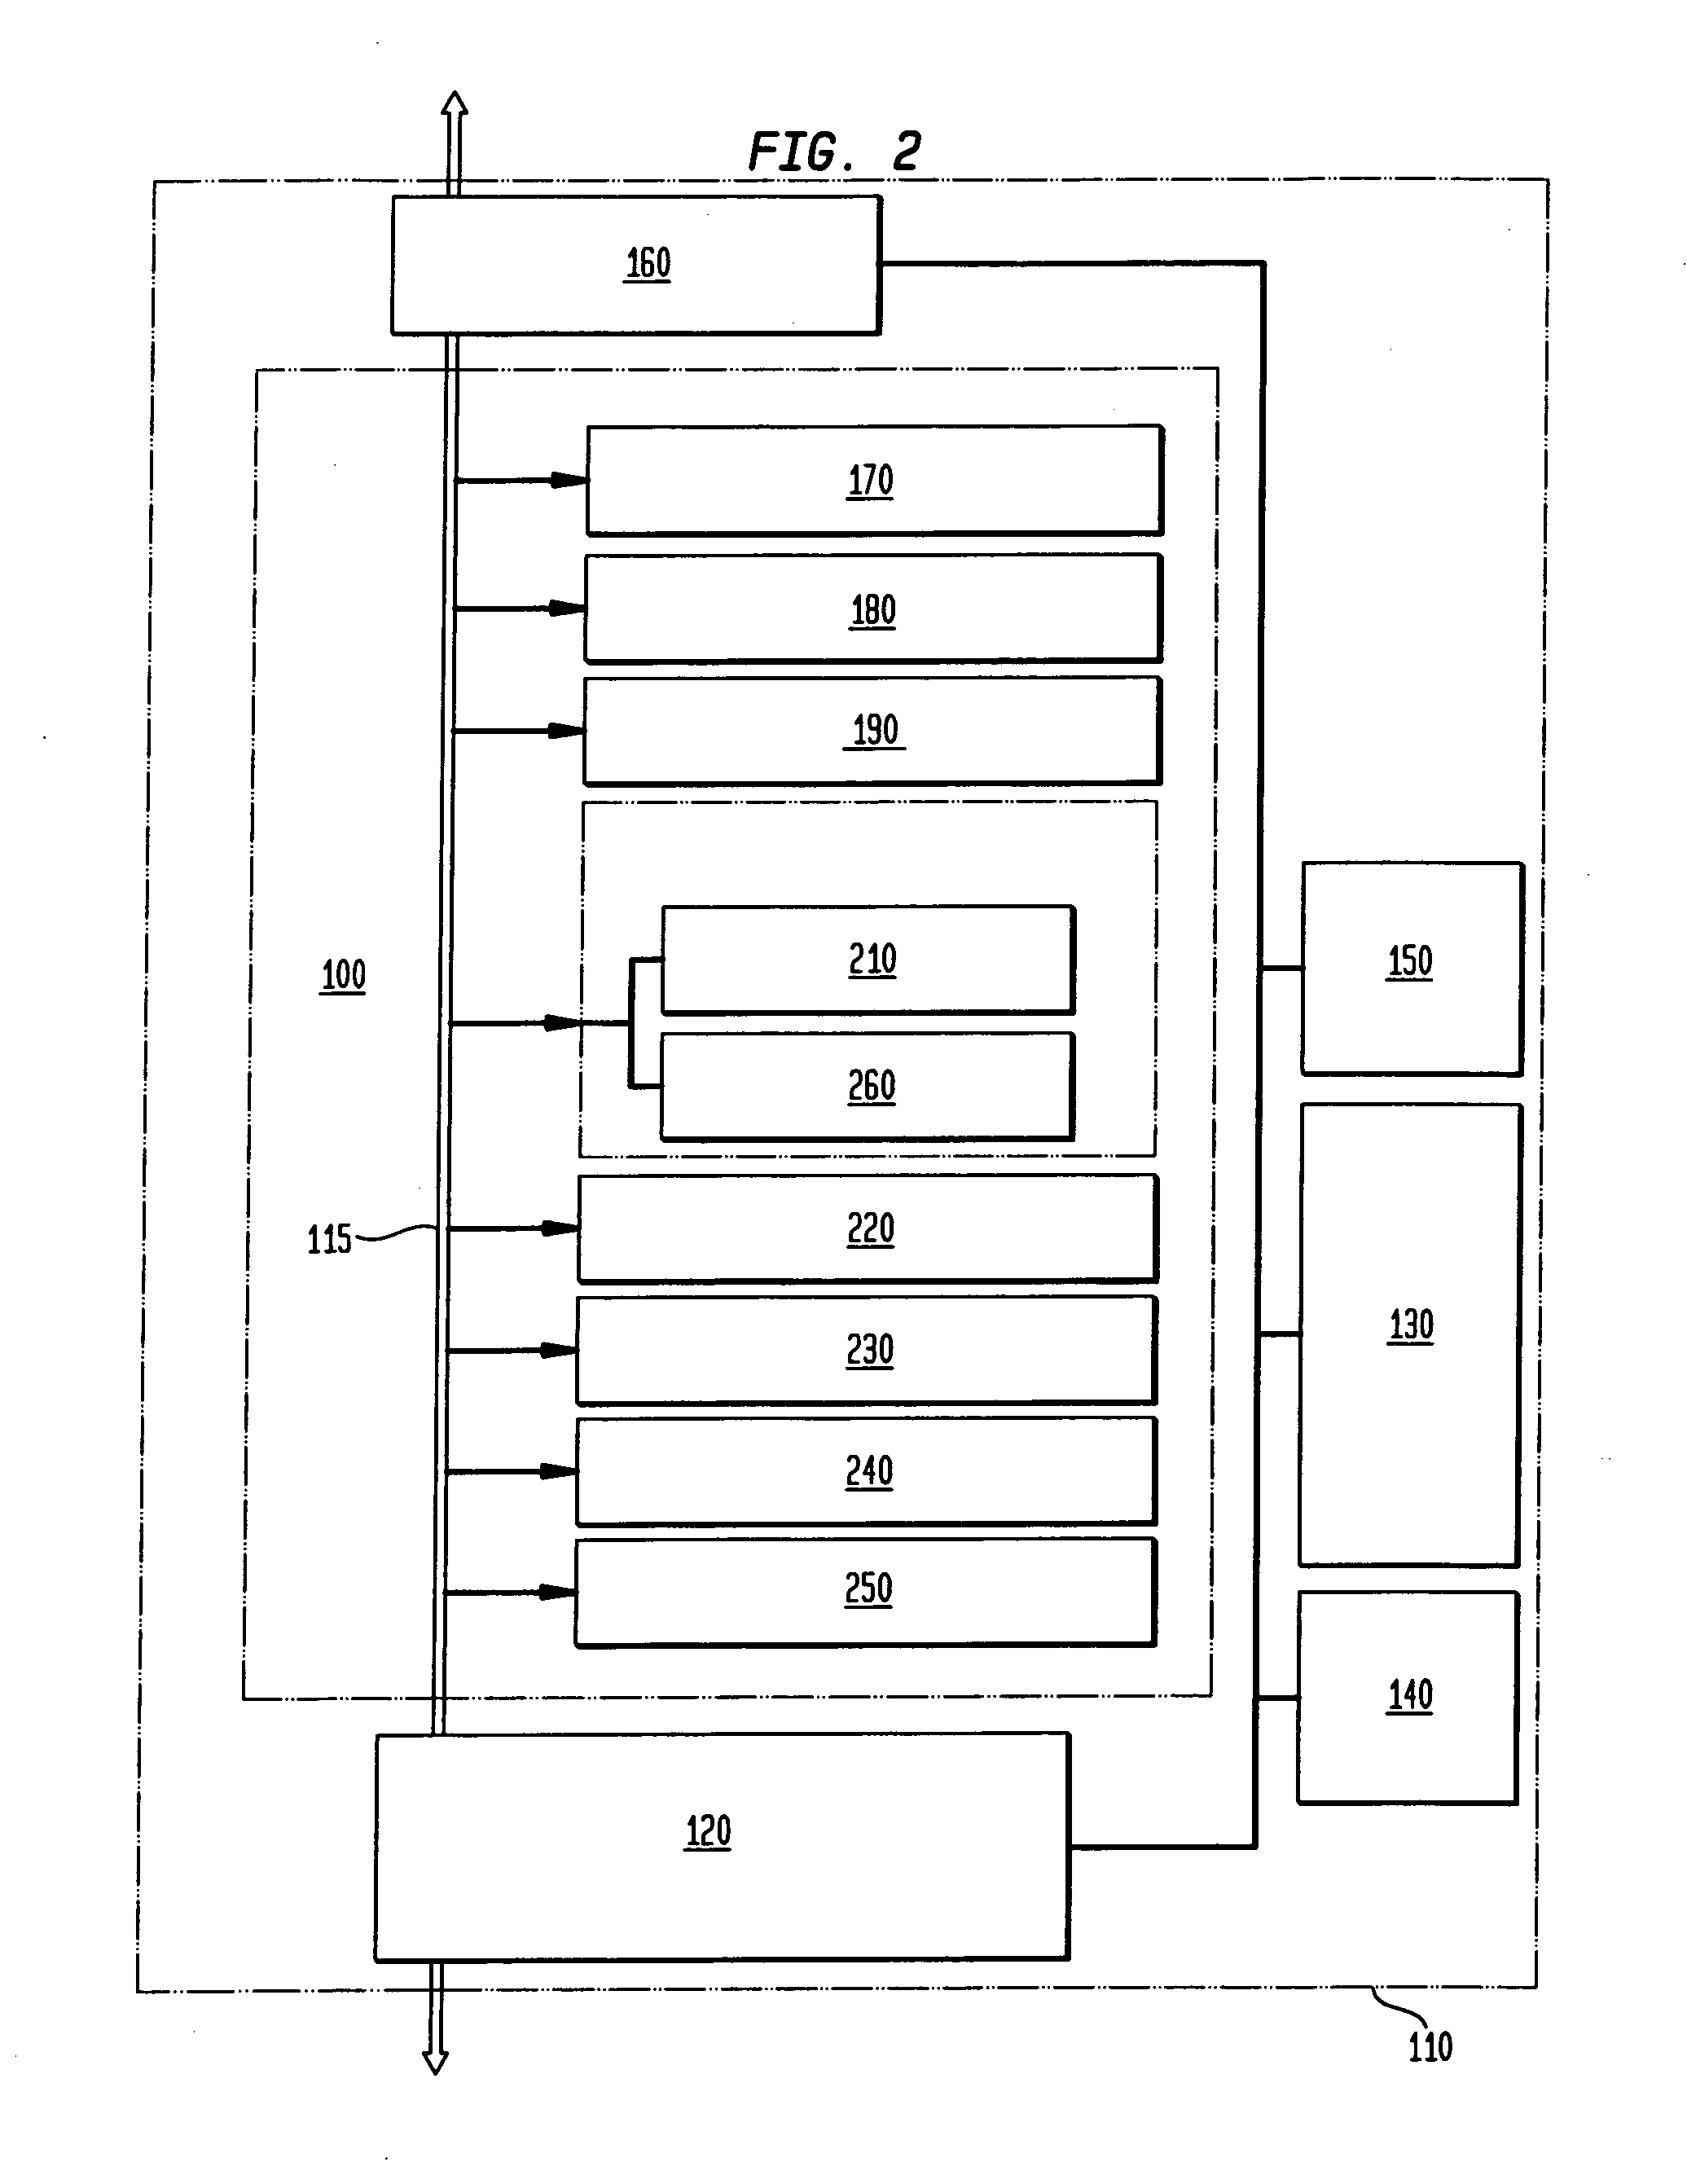 System and method for distributed media streaming and sharing